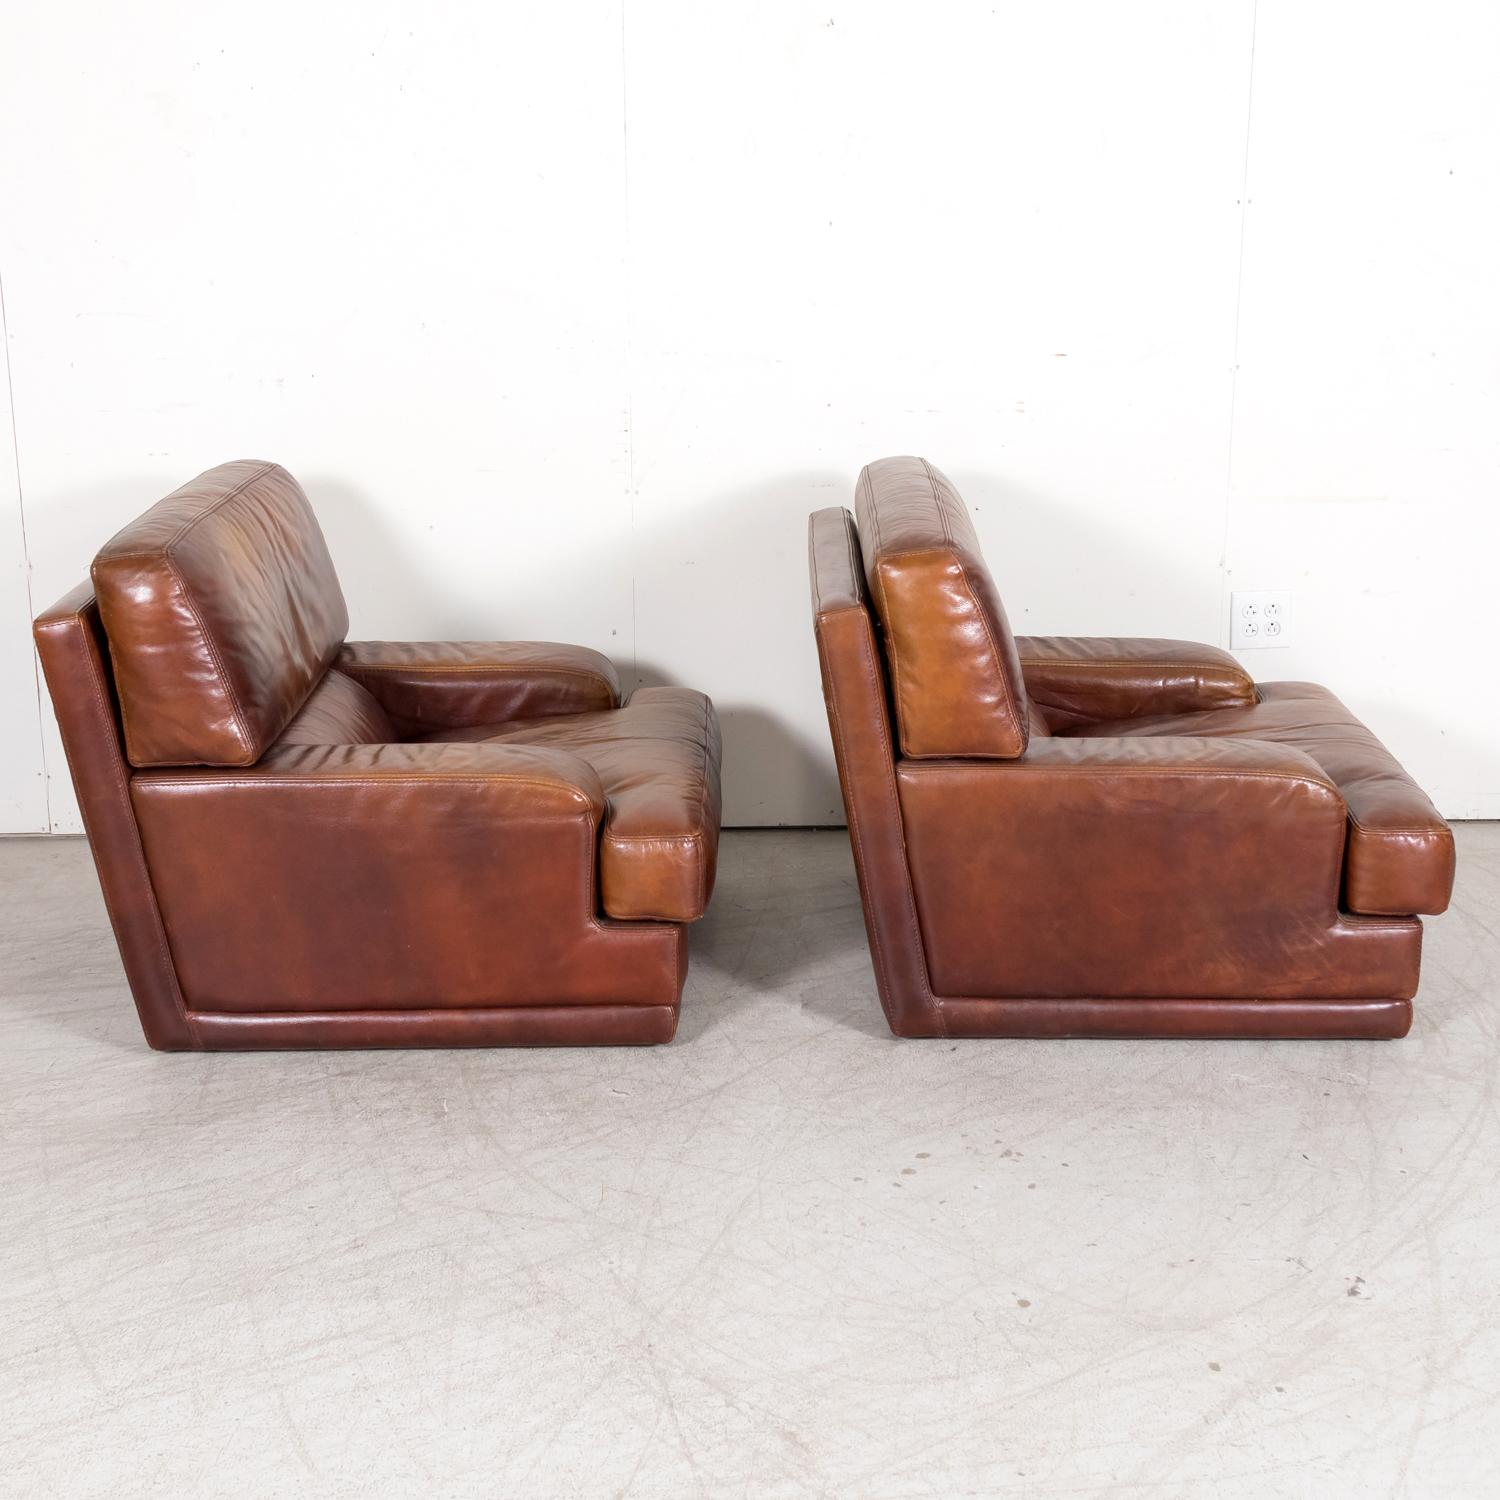 Leather 1970s Pair of French Mid-Century Modern Oversized Cognac Lounge Armchairs For Sale